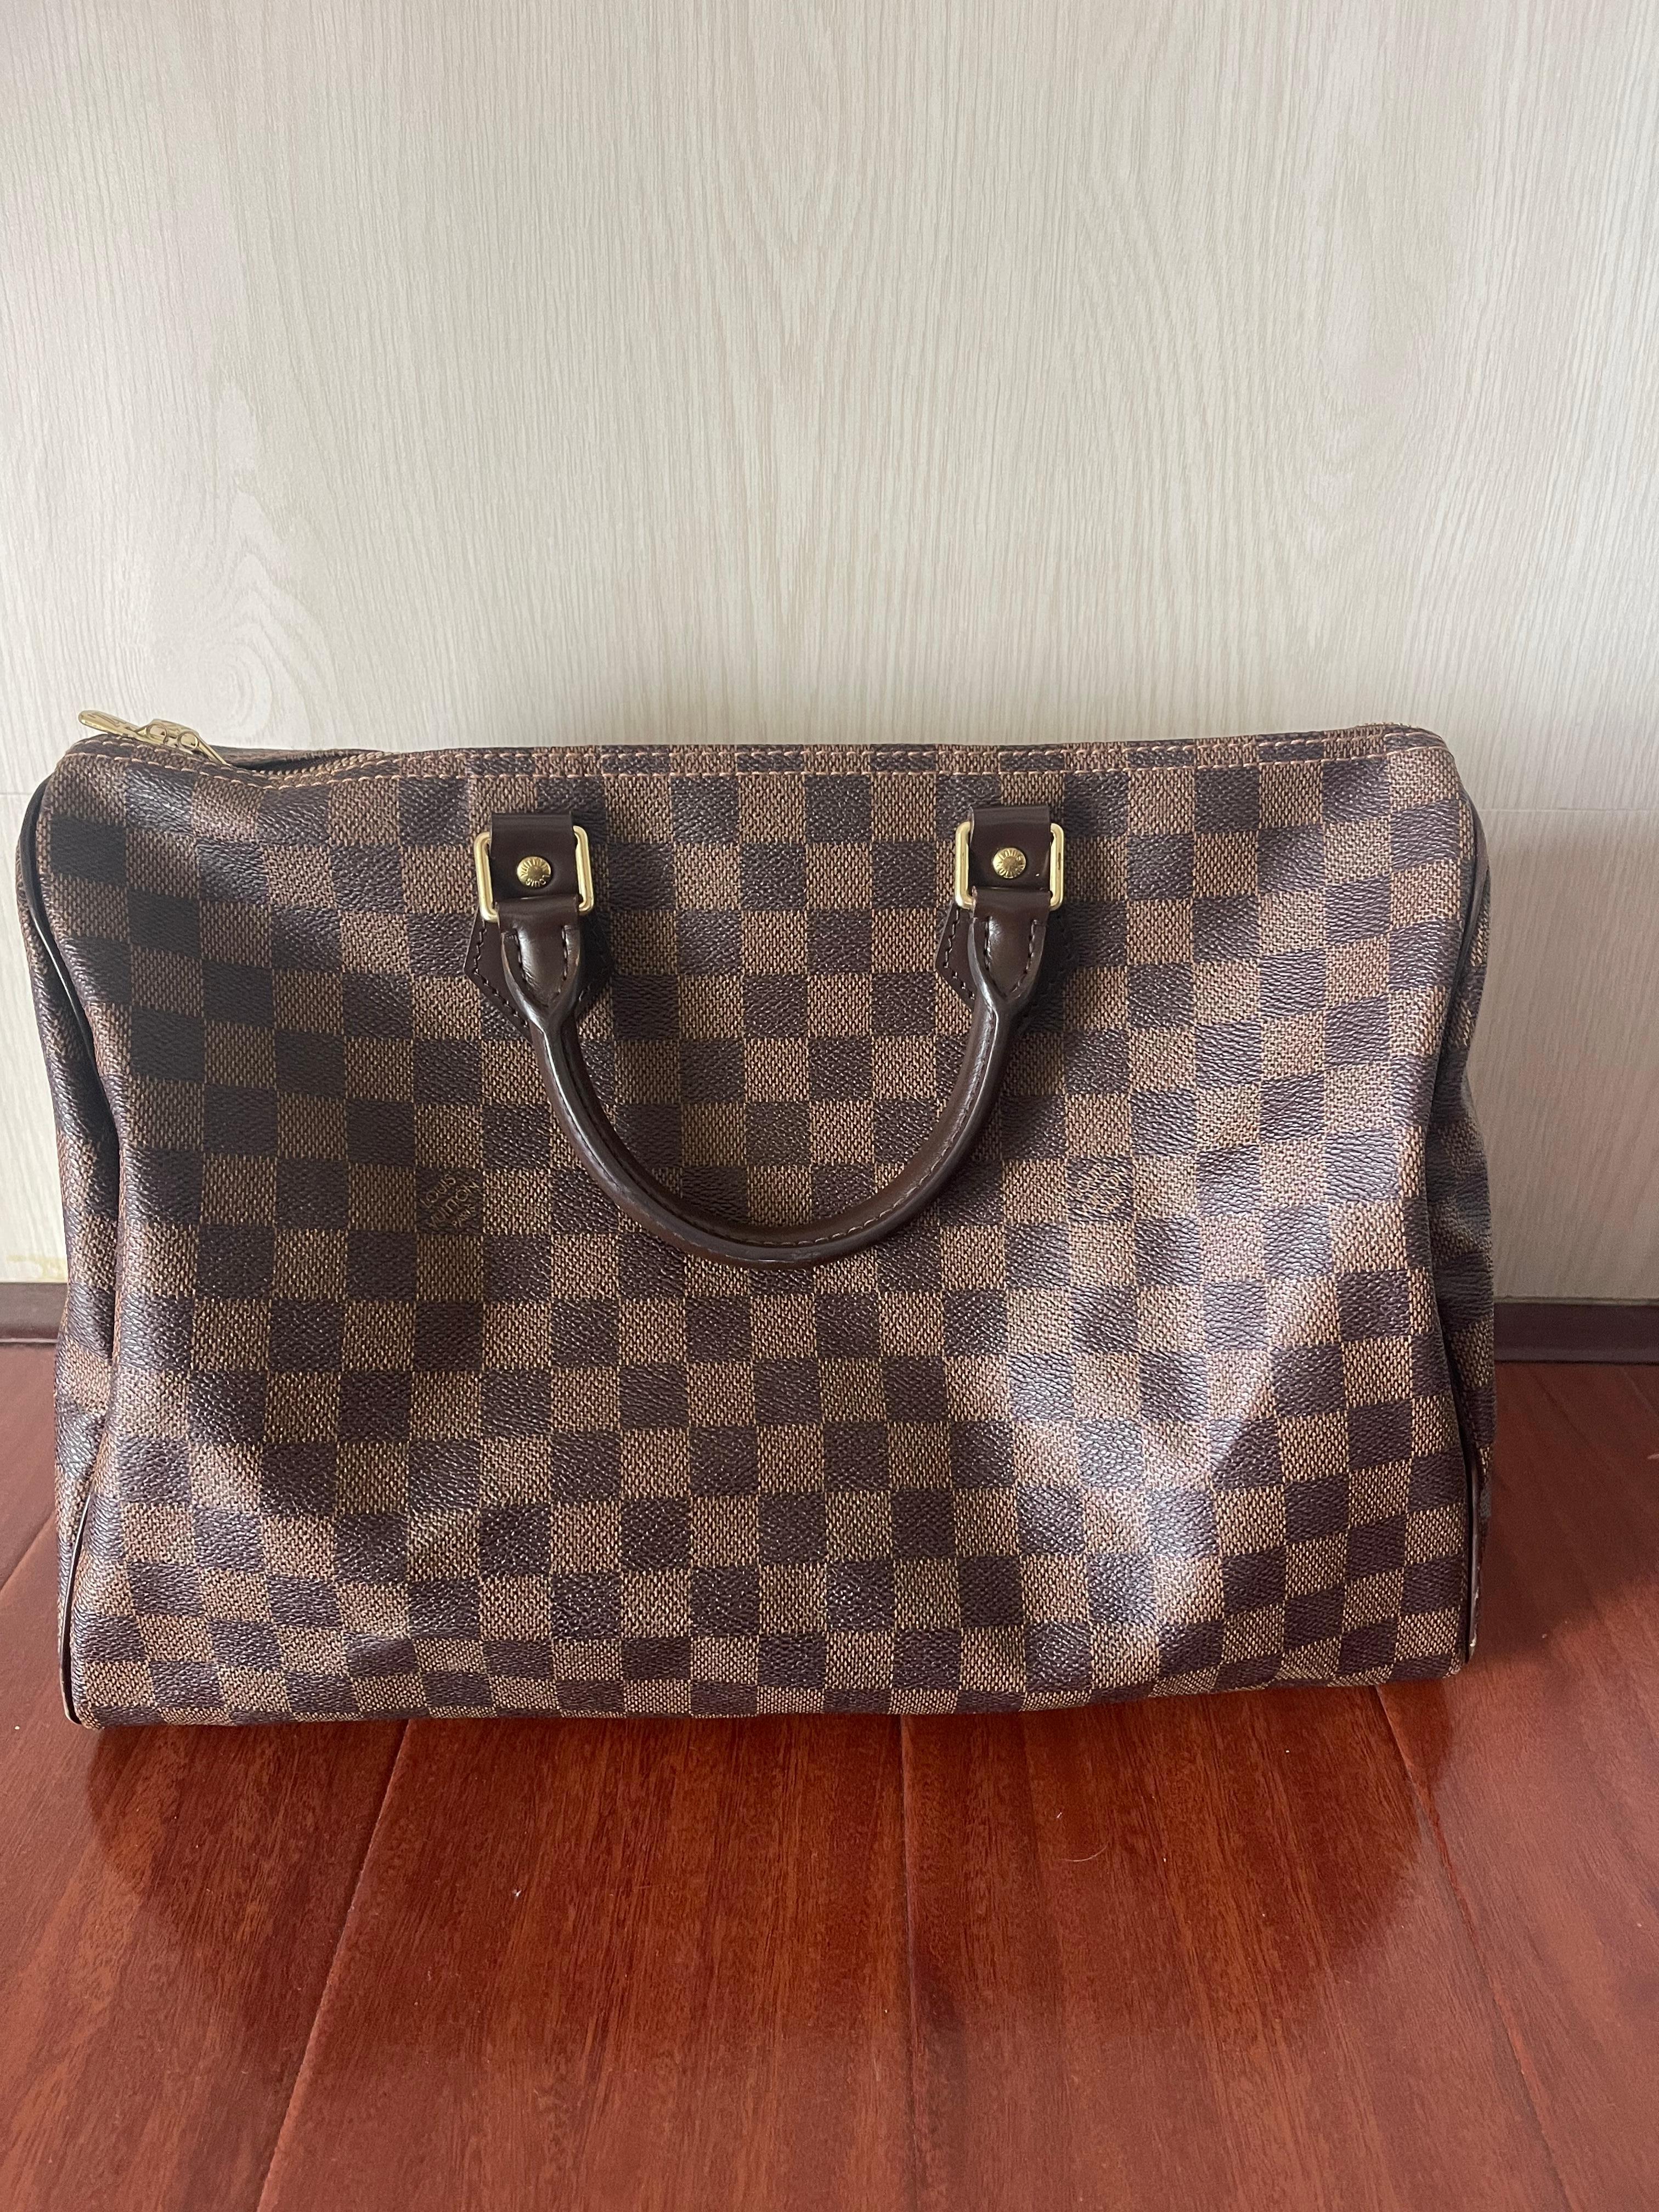 A classic speedy 35 bandouliere in damier ebene. Rarely worn condition. Light rubbing on the trim corners as seen on pictures. No significant signs of wear other than oxidation on the hardware details and key padlock inclusion. Bag has slightly lose